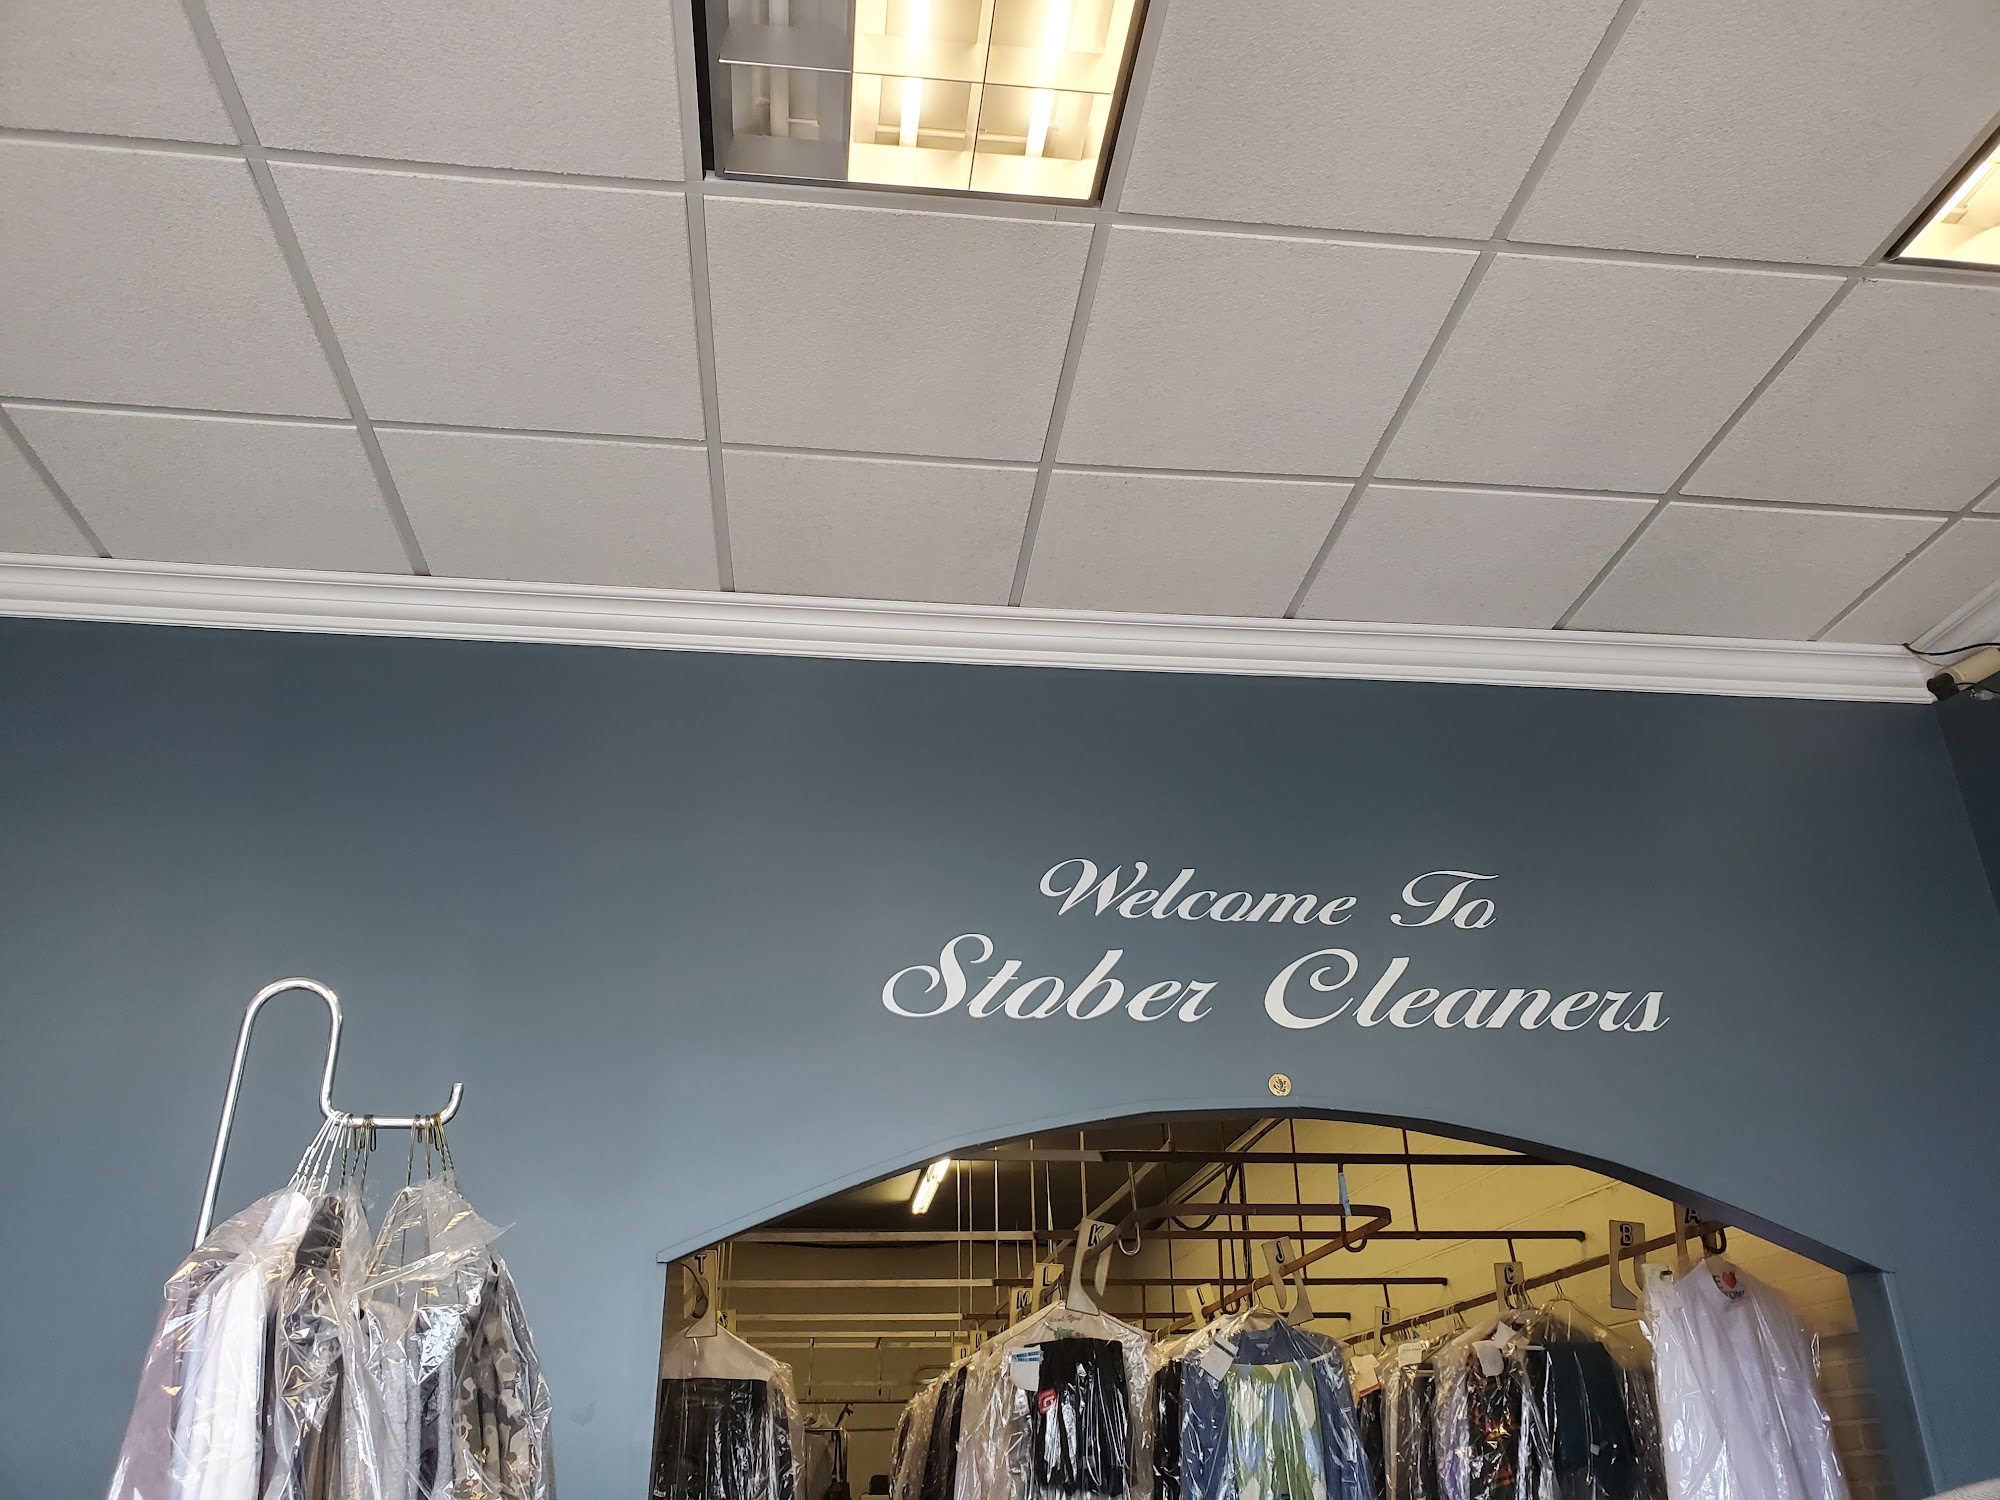 Stober Cleaners